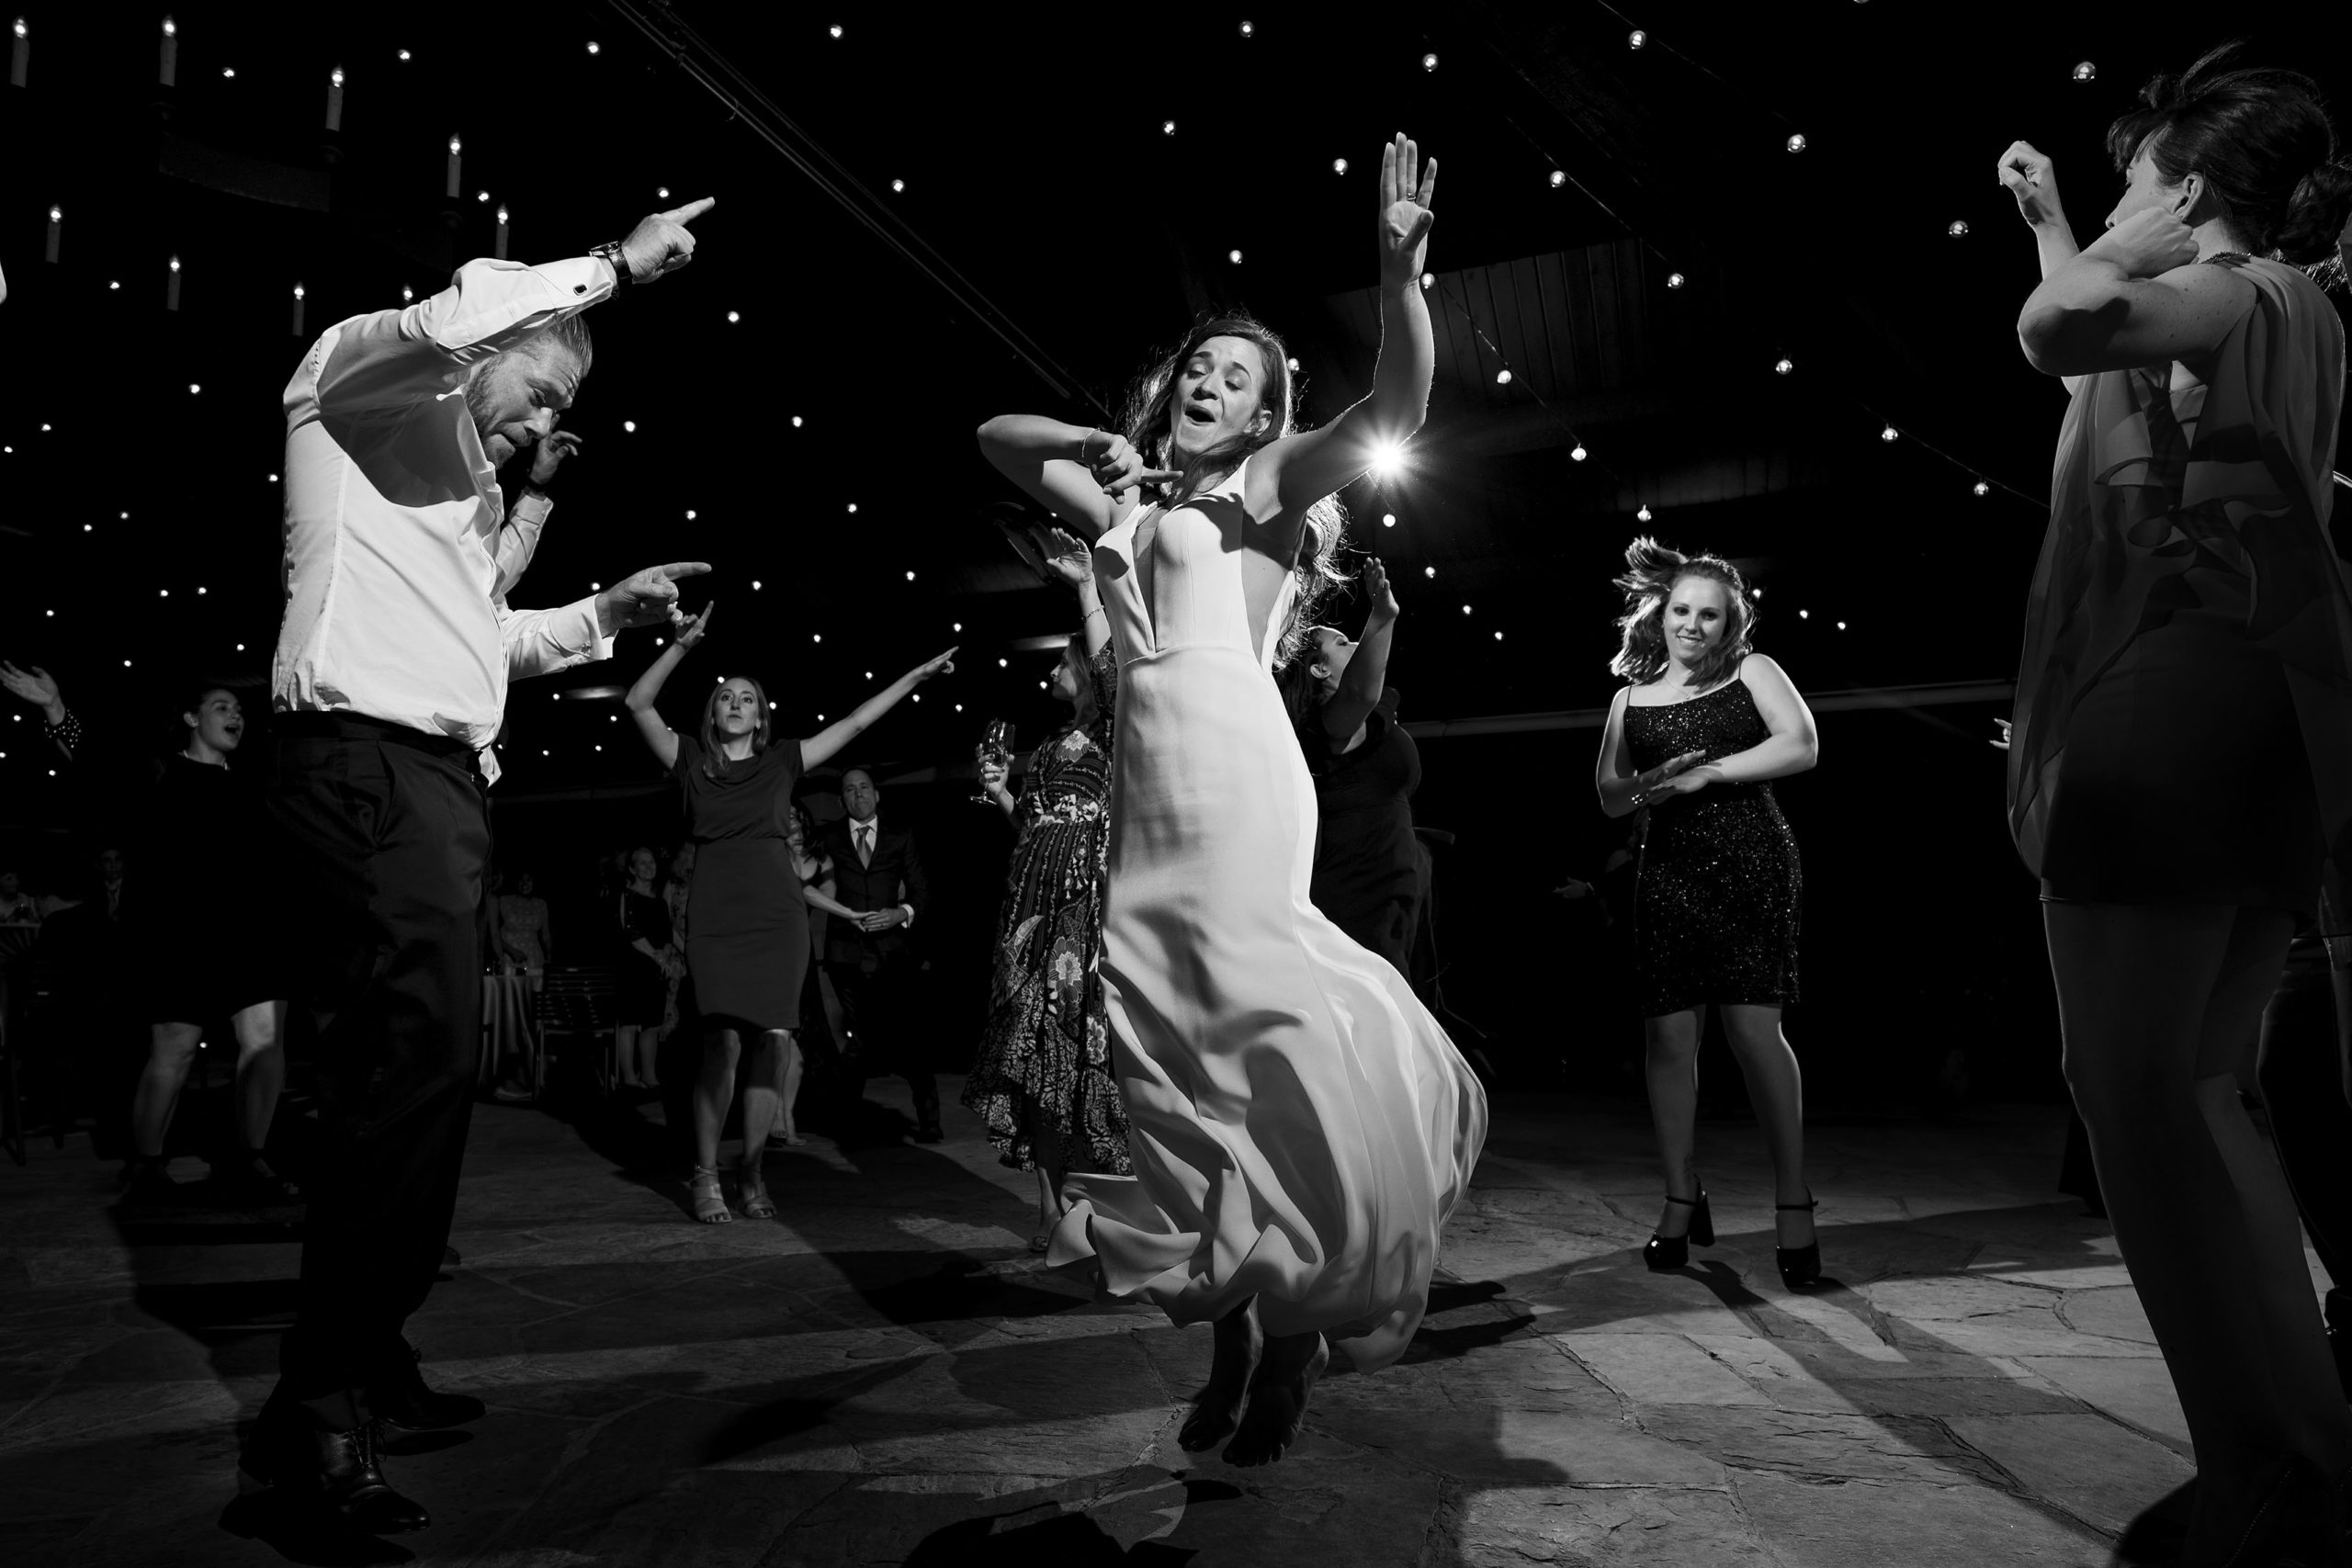 The bride, groom and guests dance during a wedding reception at Sanctuary